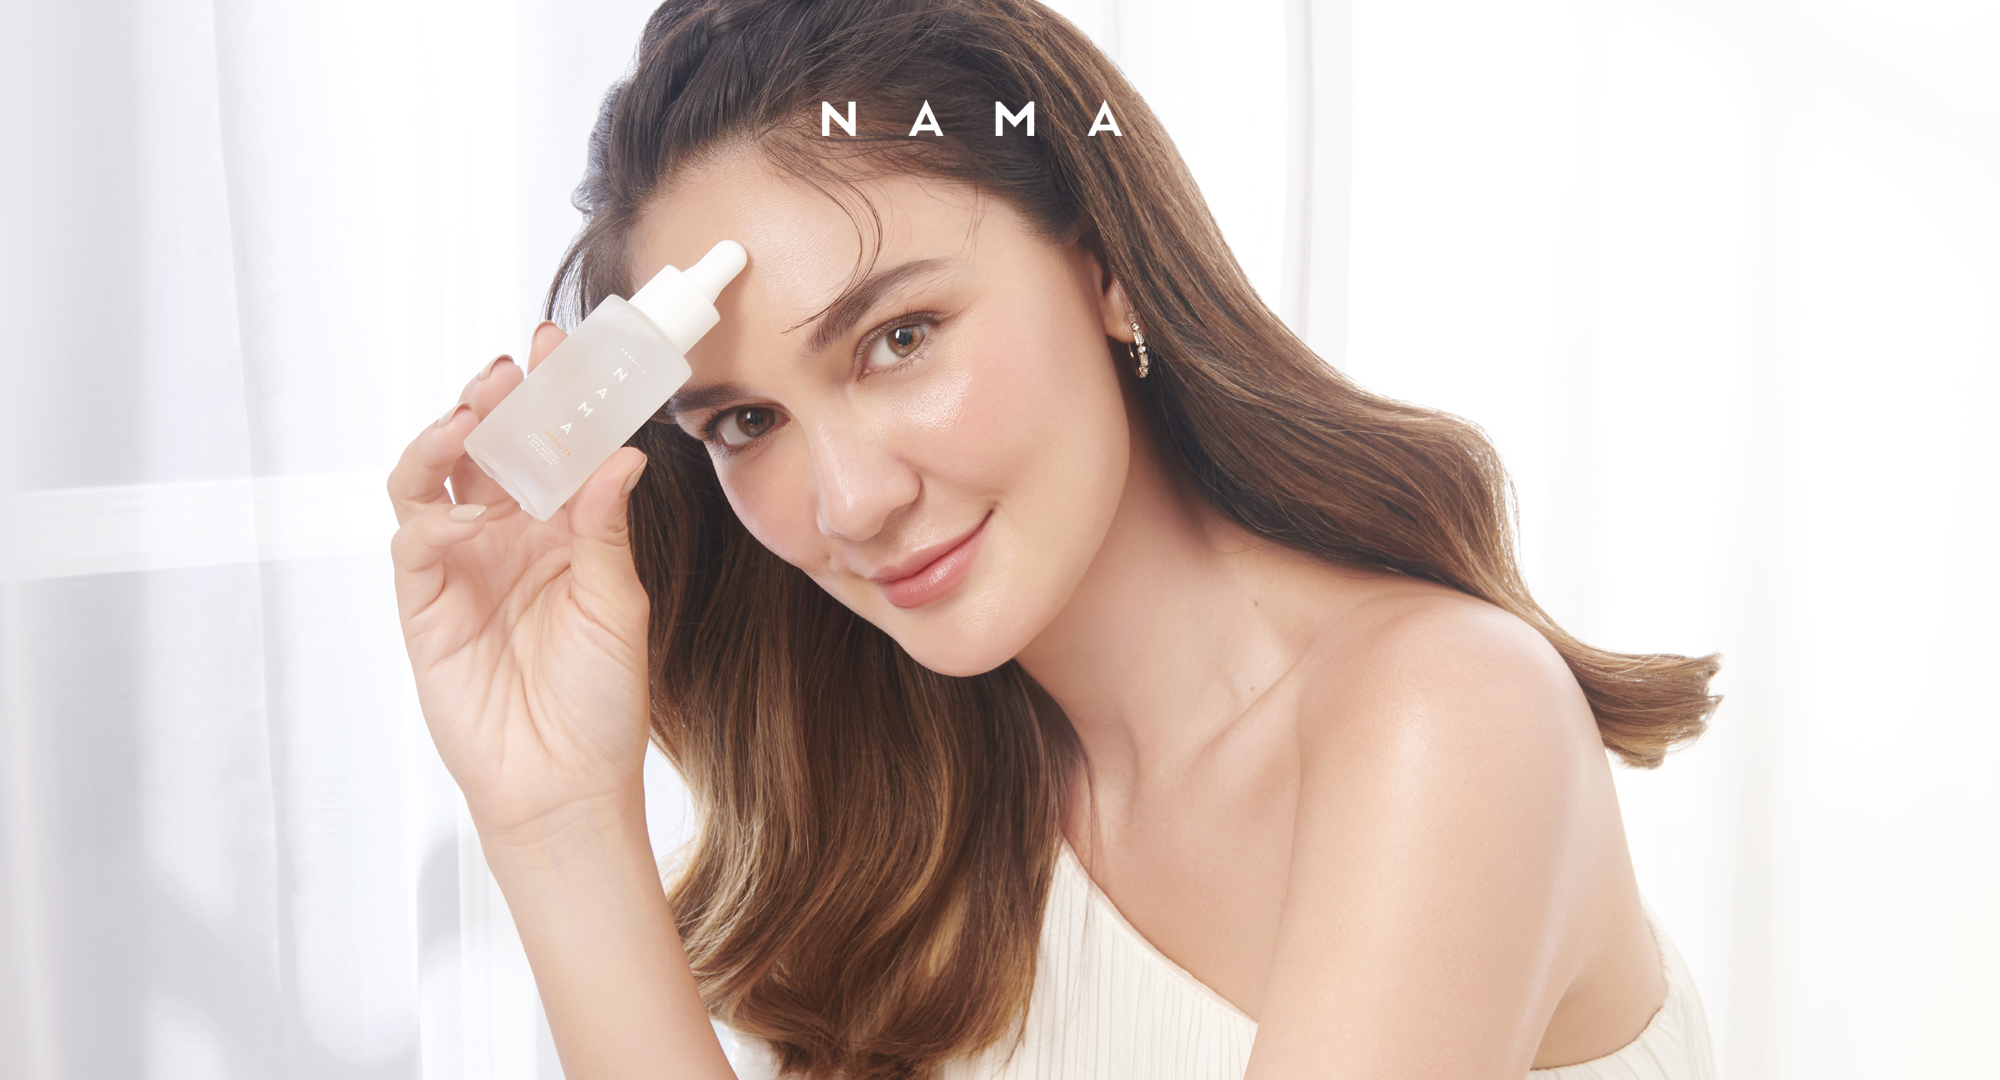 Indonesia D2C skincare brand NAMA Beauty raises $5M in seed funding led by AC Ventures, plans to launch second-line brand